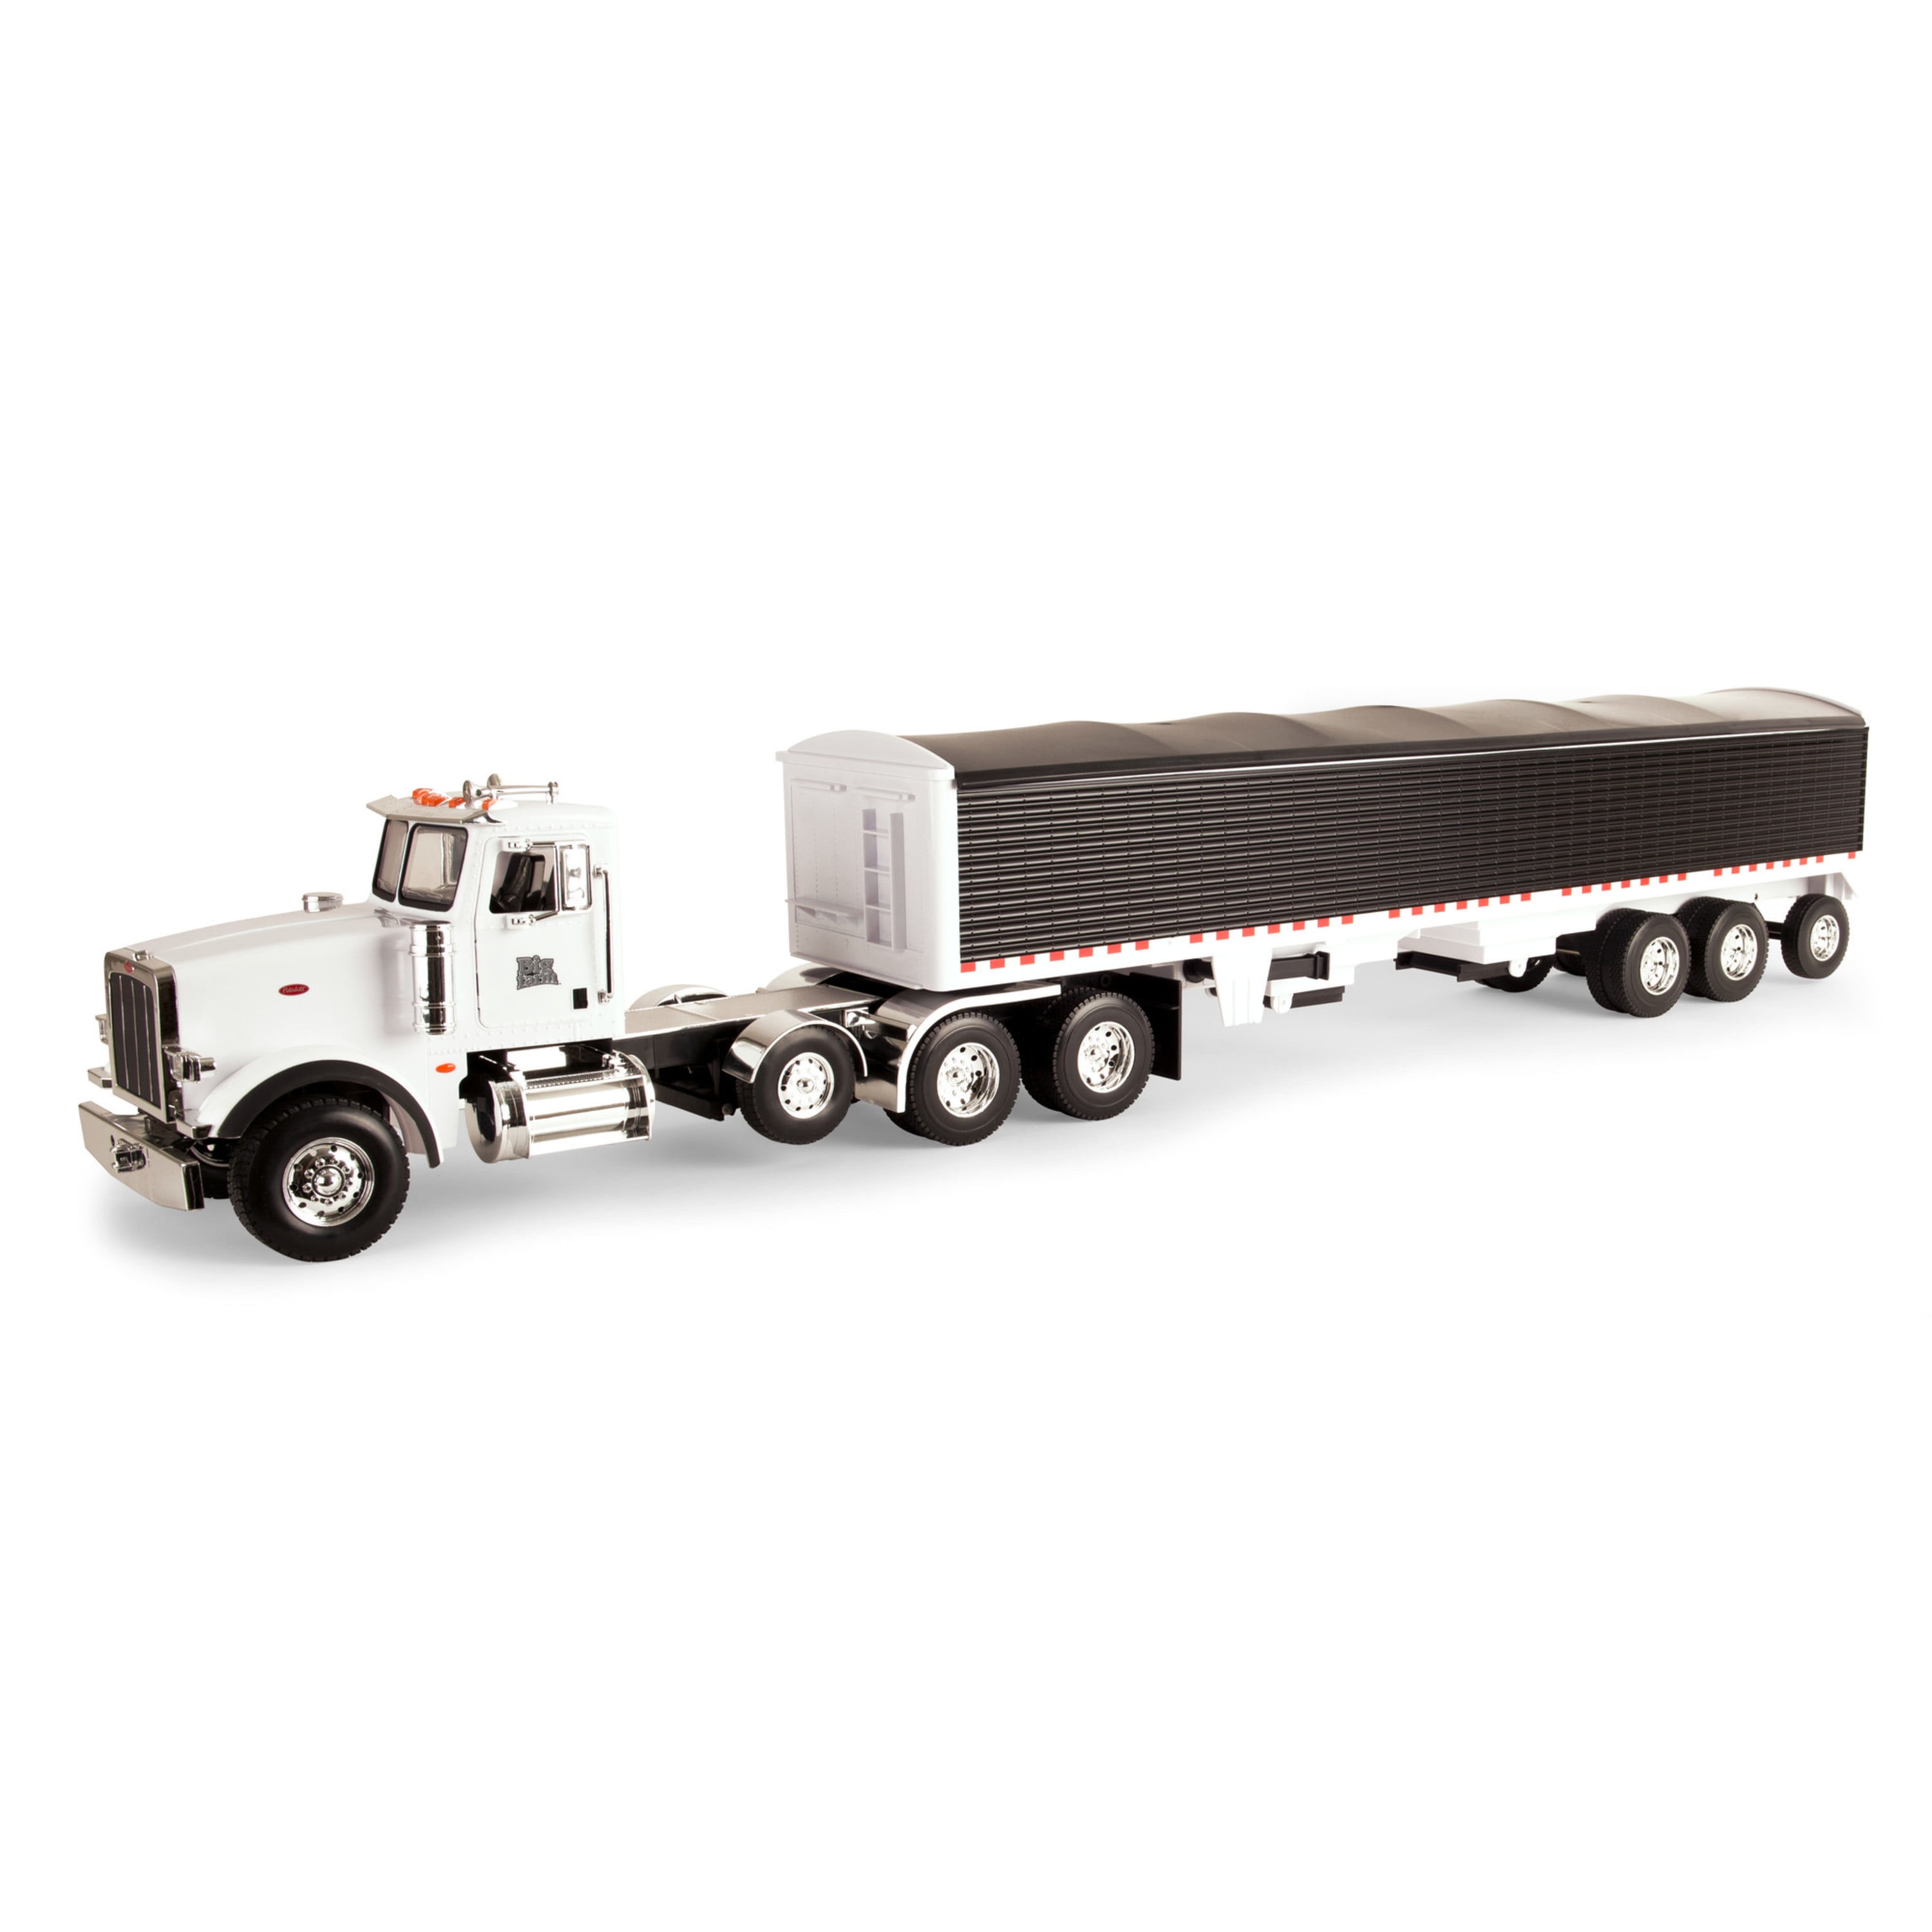 Vintage Original Galaxie Limited 1/24 Scale 21 Foot Tag-along Trailer Model Kit for sale online 